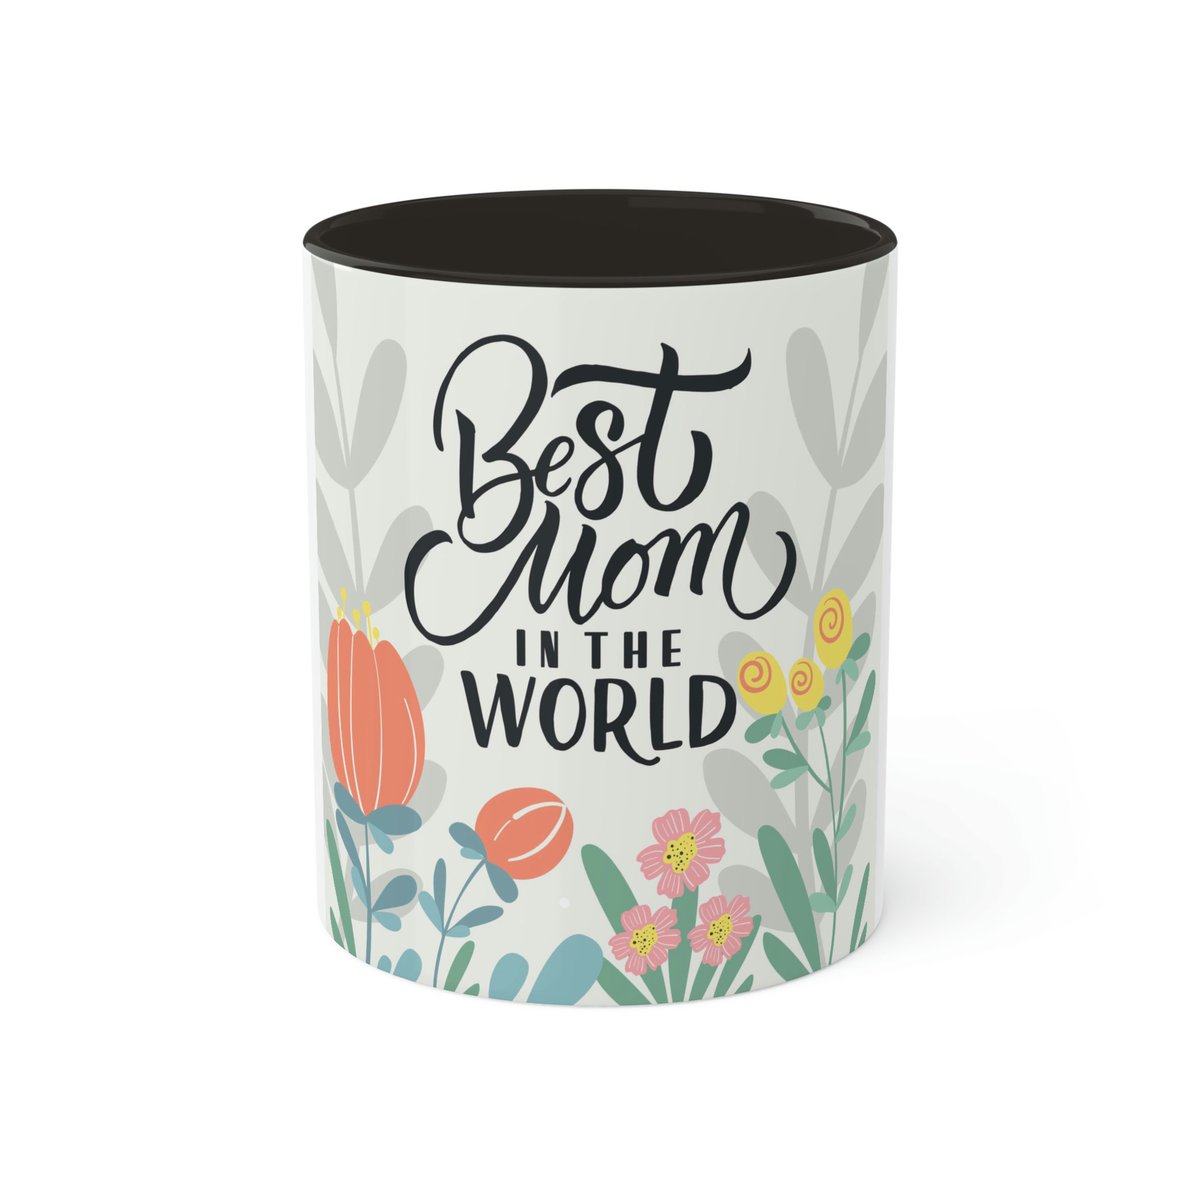 Best Ceramic Coffee Mug for Mothers Day Gift for Mom, Floral Coffee Cup with Letter MOM, Custom Coffee Mug etsy.me/3LA5yyf #white #yes #ceramic #ceramiccoffeemug #whitecoffeemug #coffeemug  #etsyshop#mothersdaygift